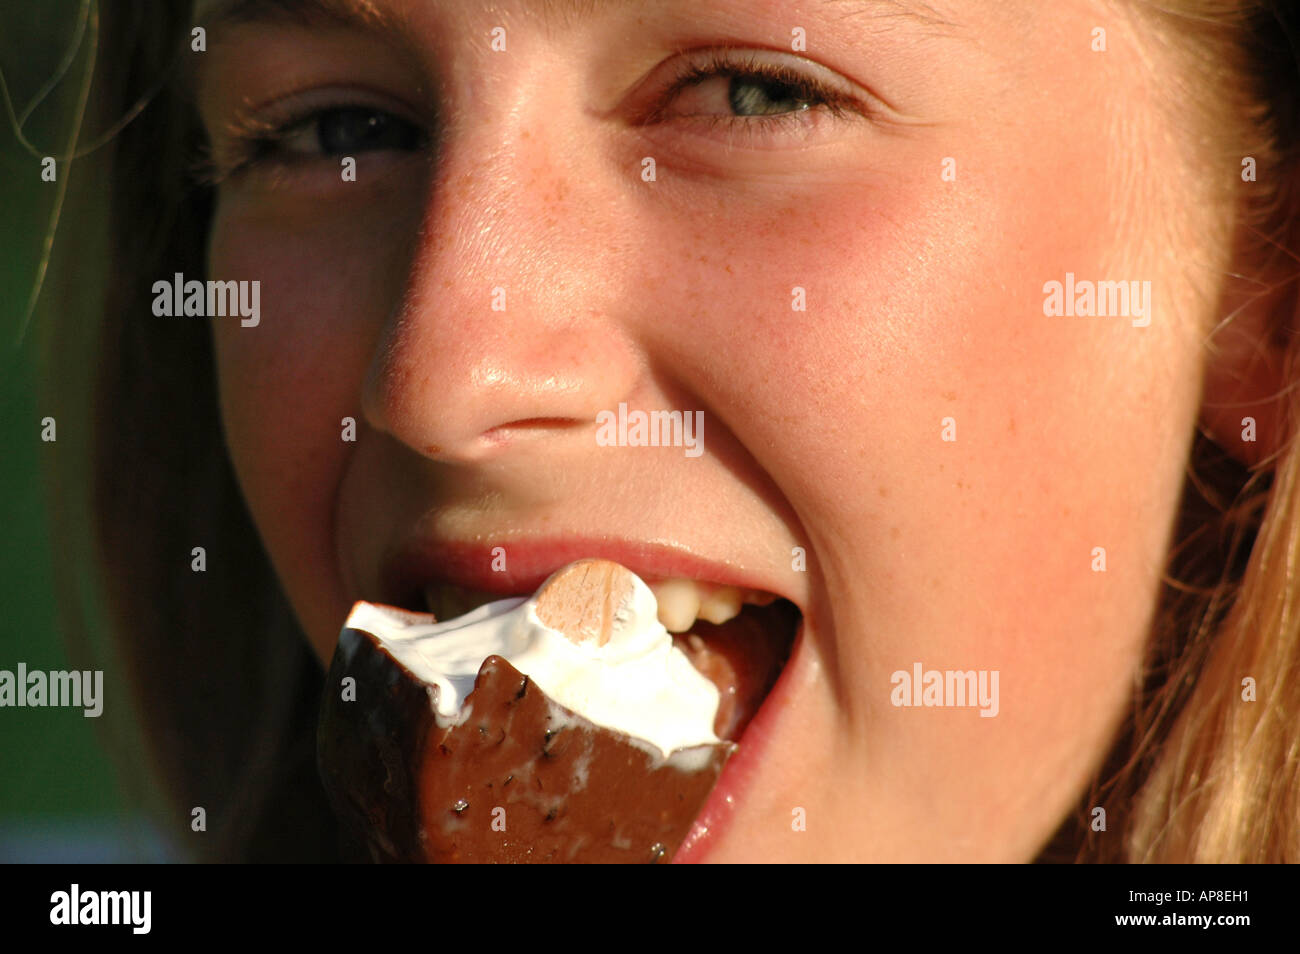 Portrait of young girl eating an ice cream lolly and looking happy Stock Photo